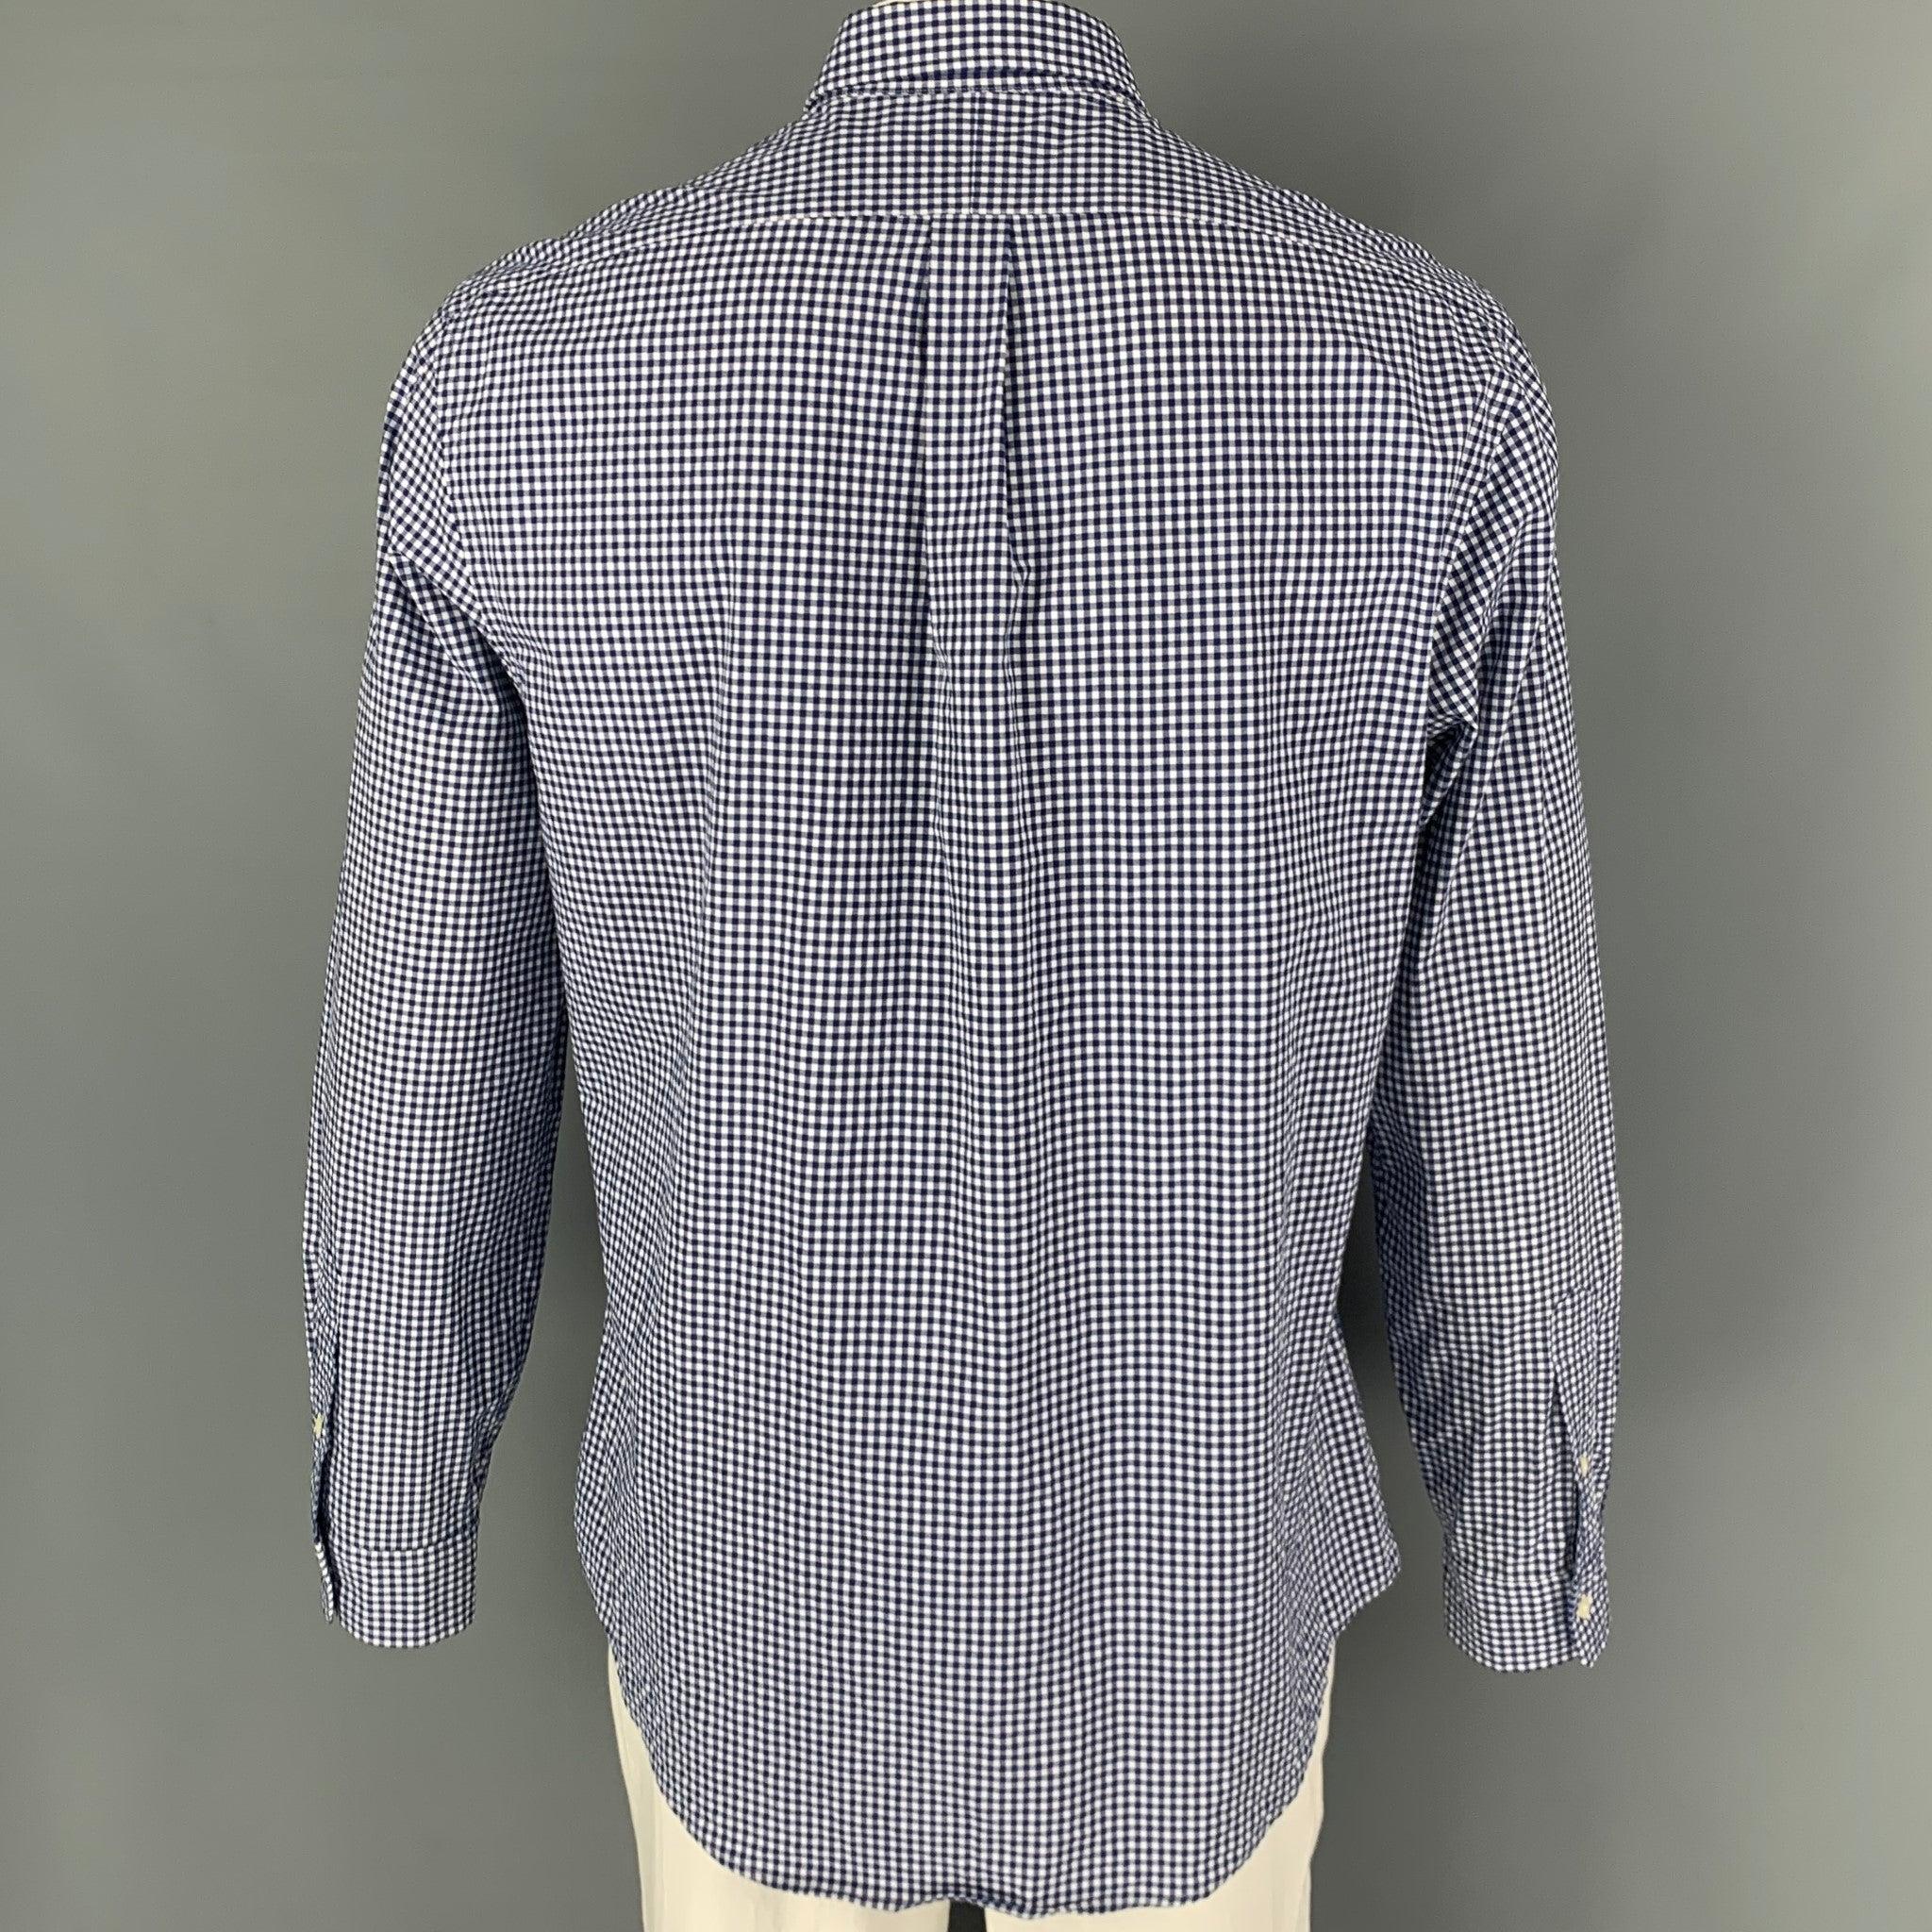 RALPH LAUREN Size XL Navy White Gingham Cotton Long Sleeve Shirt In Good Condition For Sale In San Francisco, CA